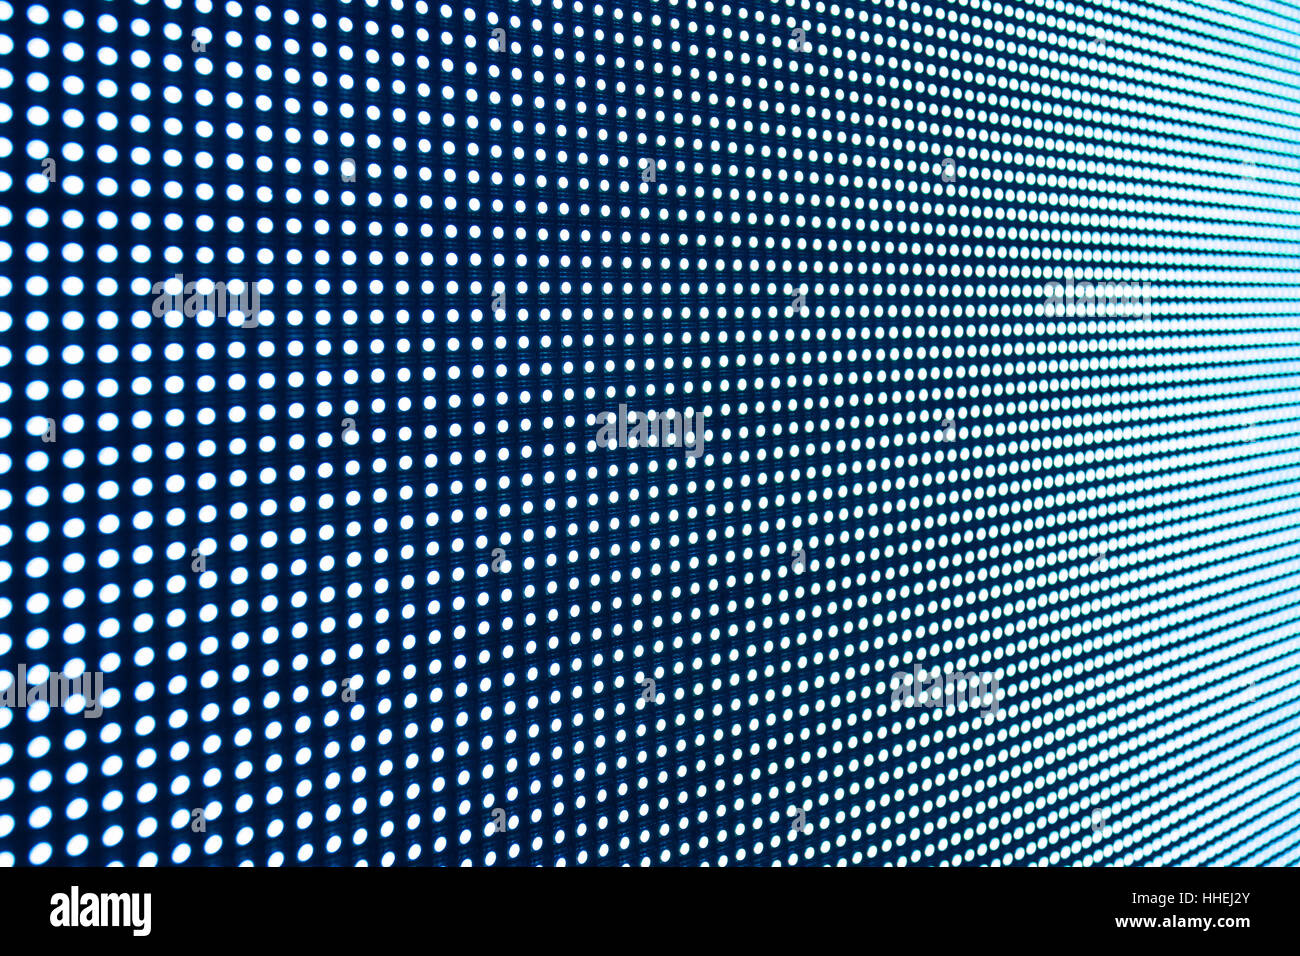 LED display screen background texture Stock Photo